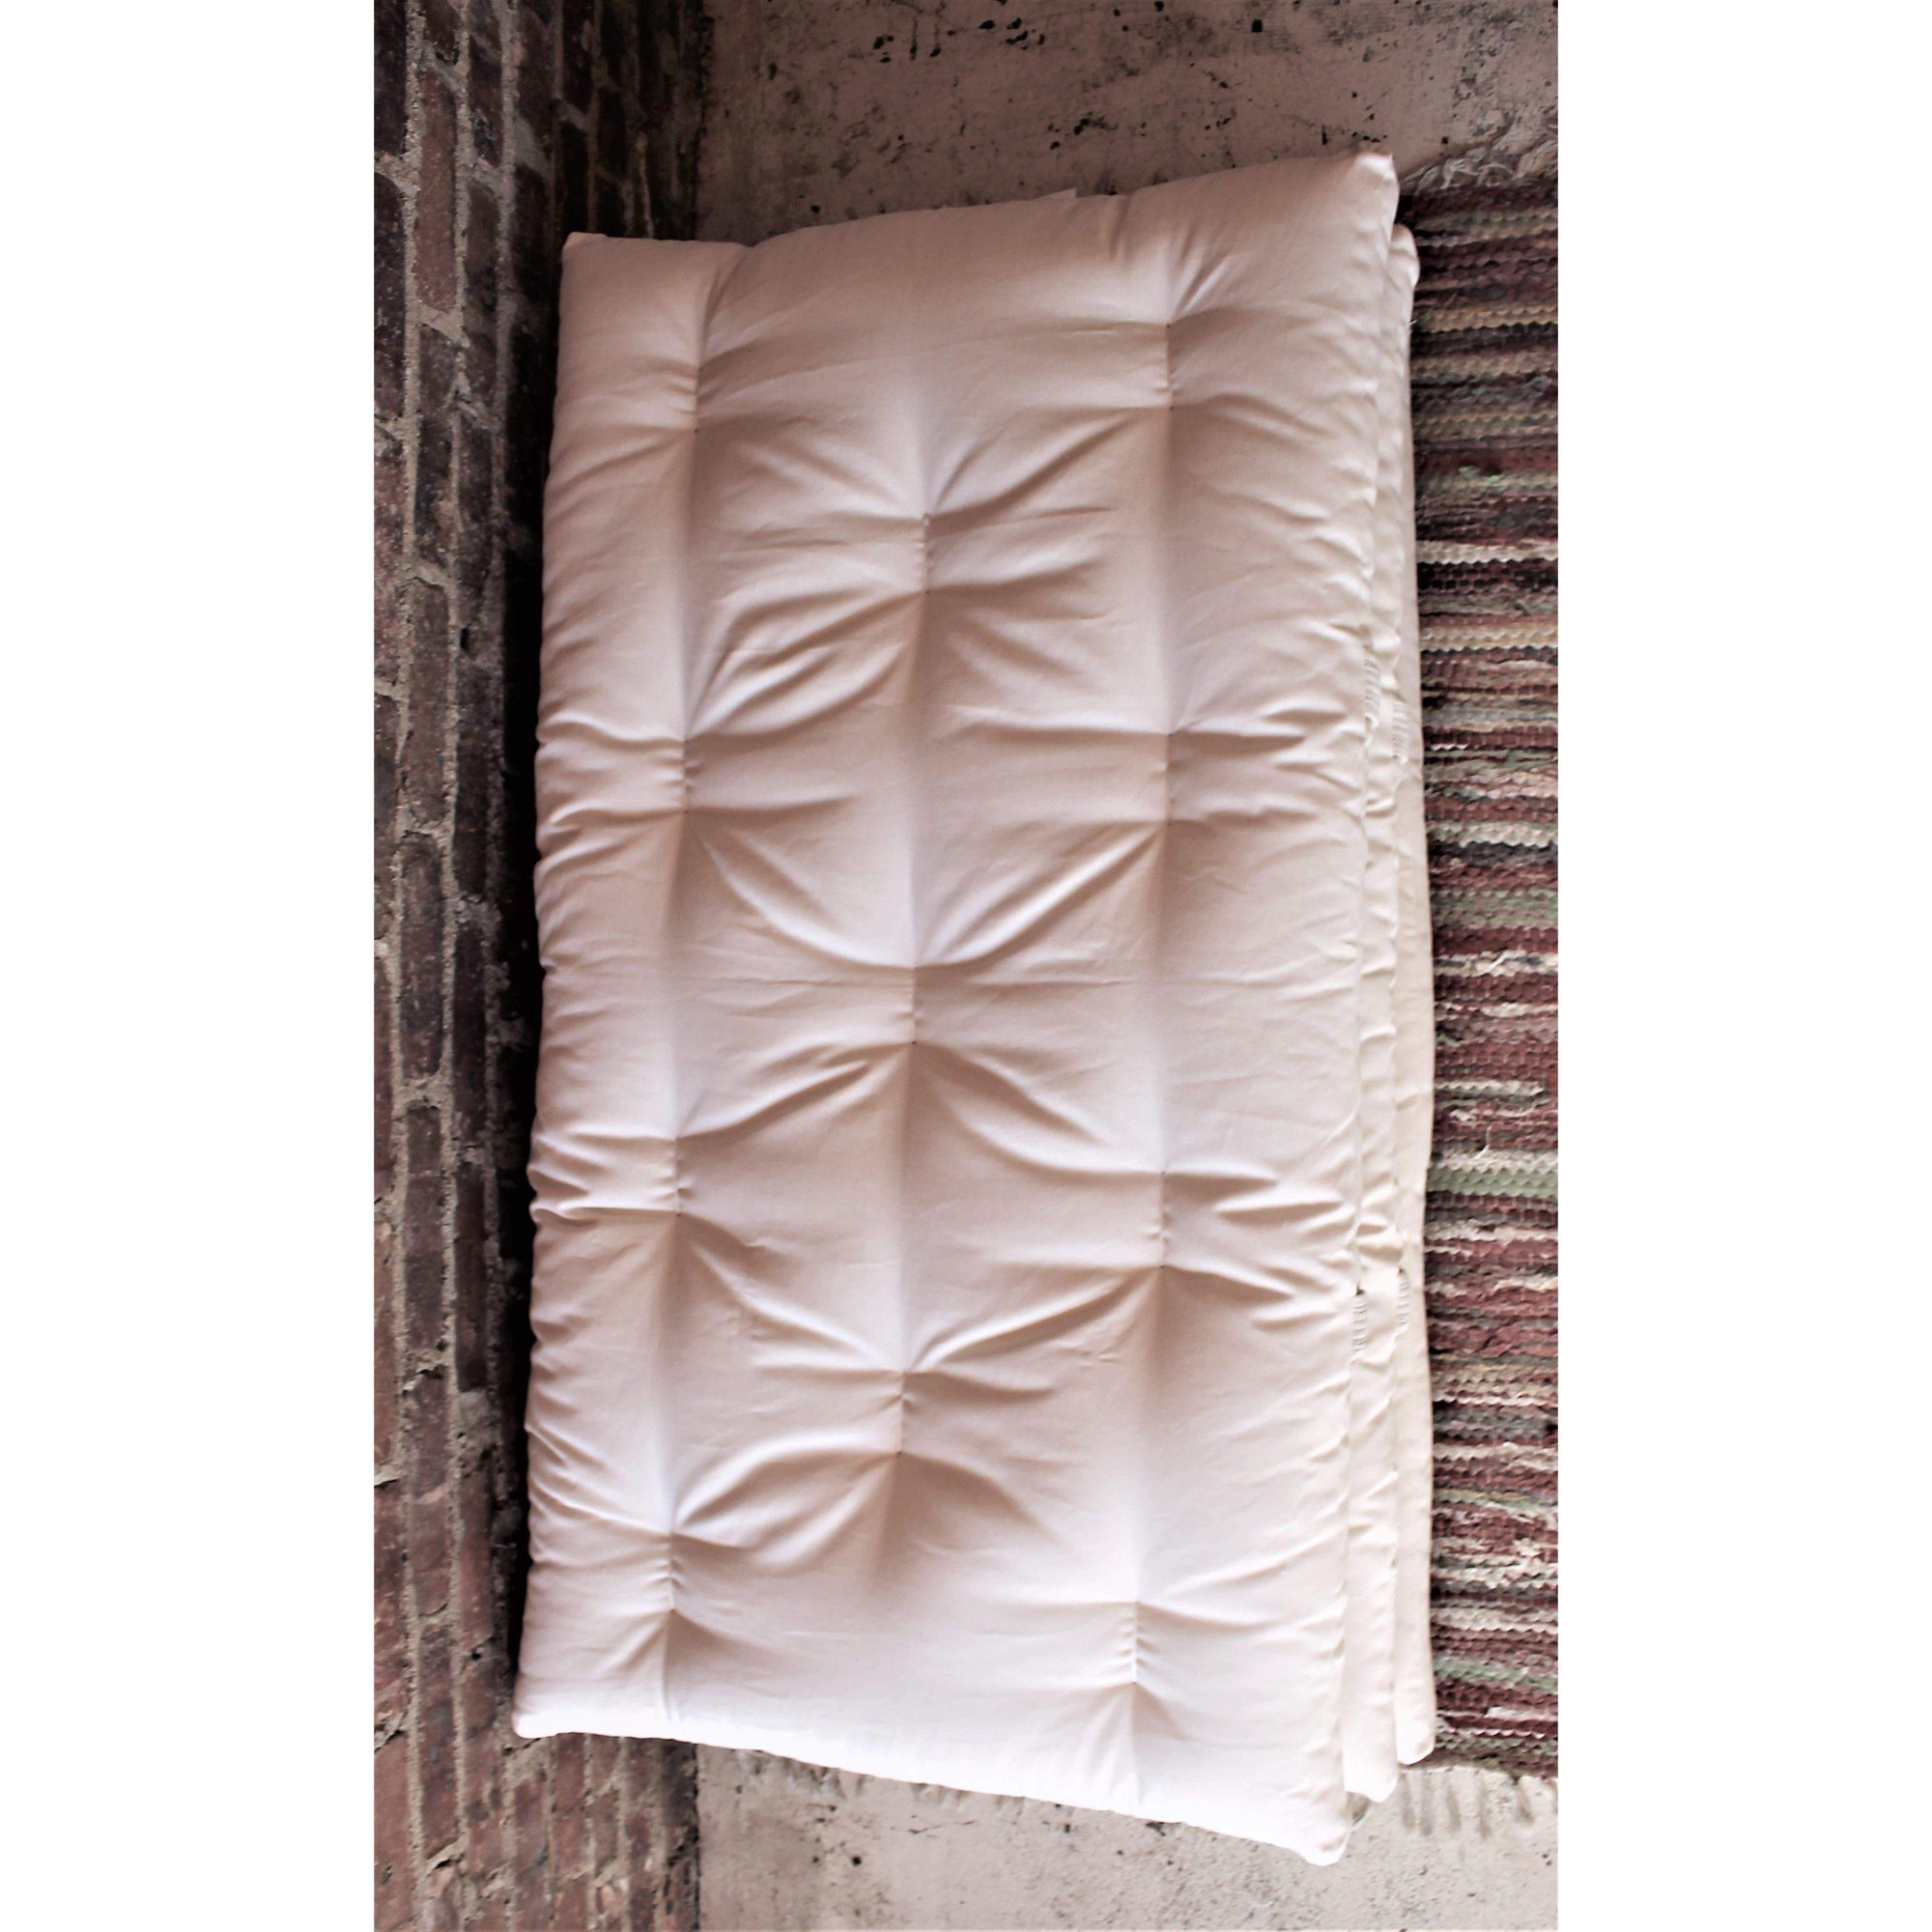 Rugs by Roo | White Lotus Home Dreamton Organic Toddler Mattress-OCDRM